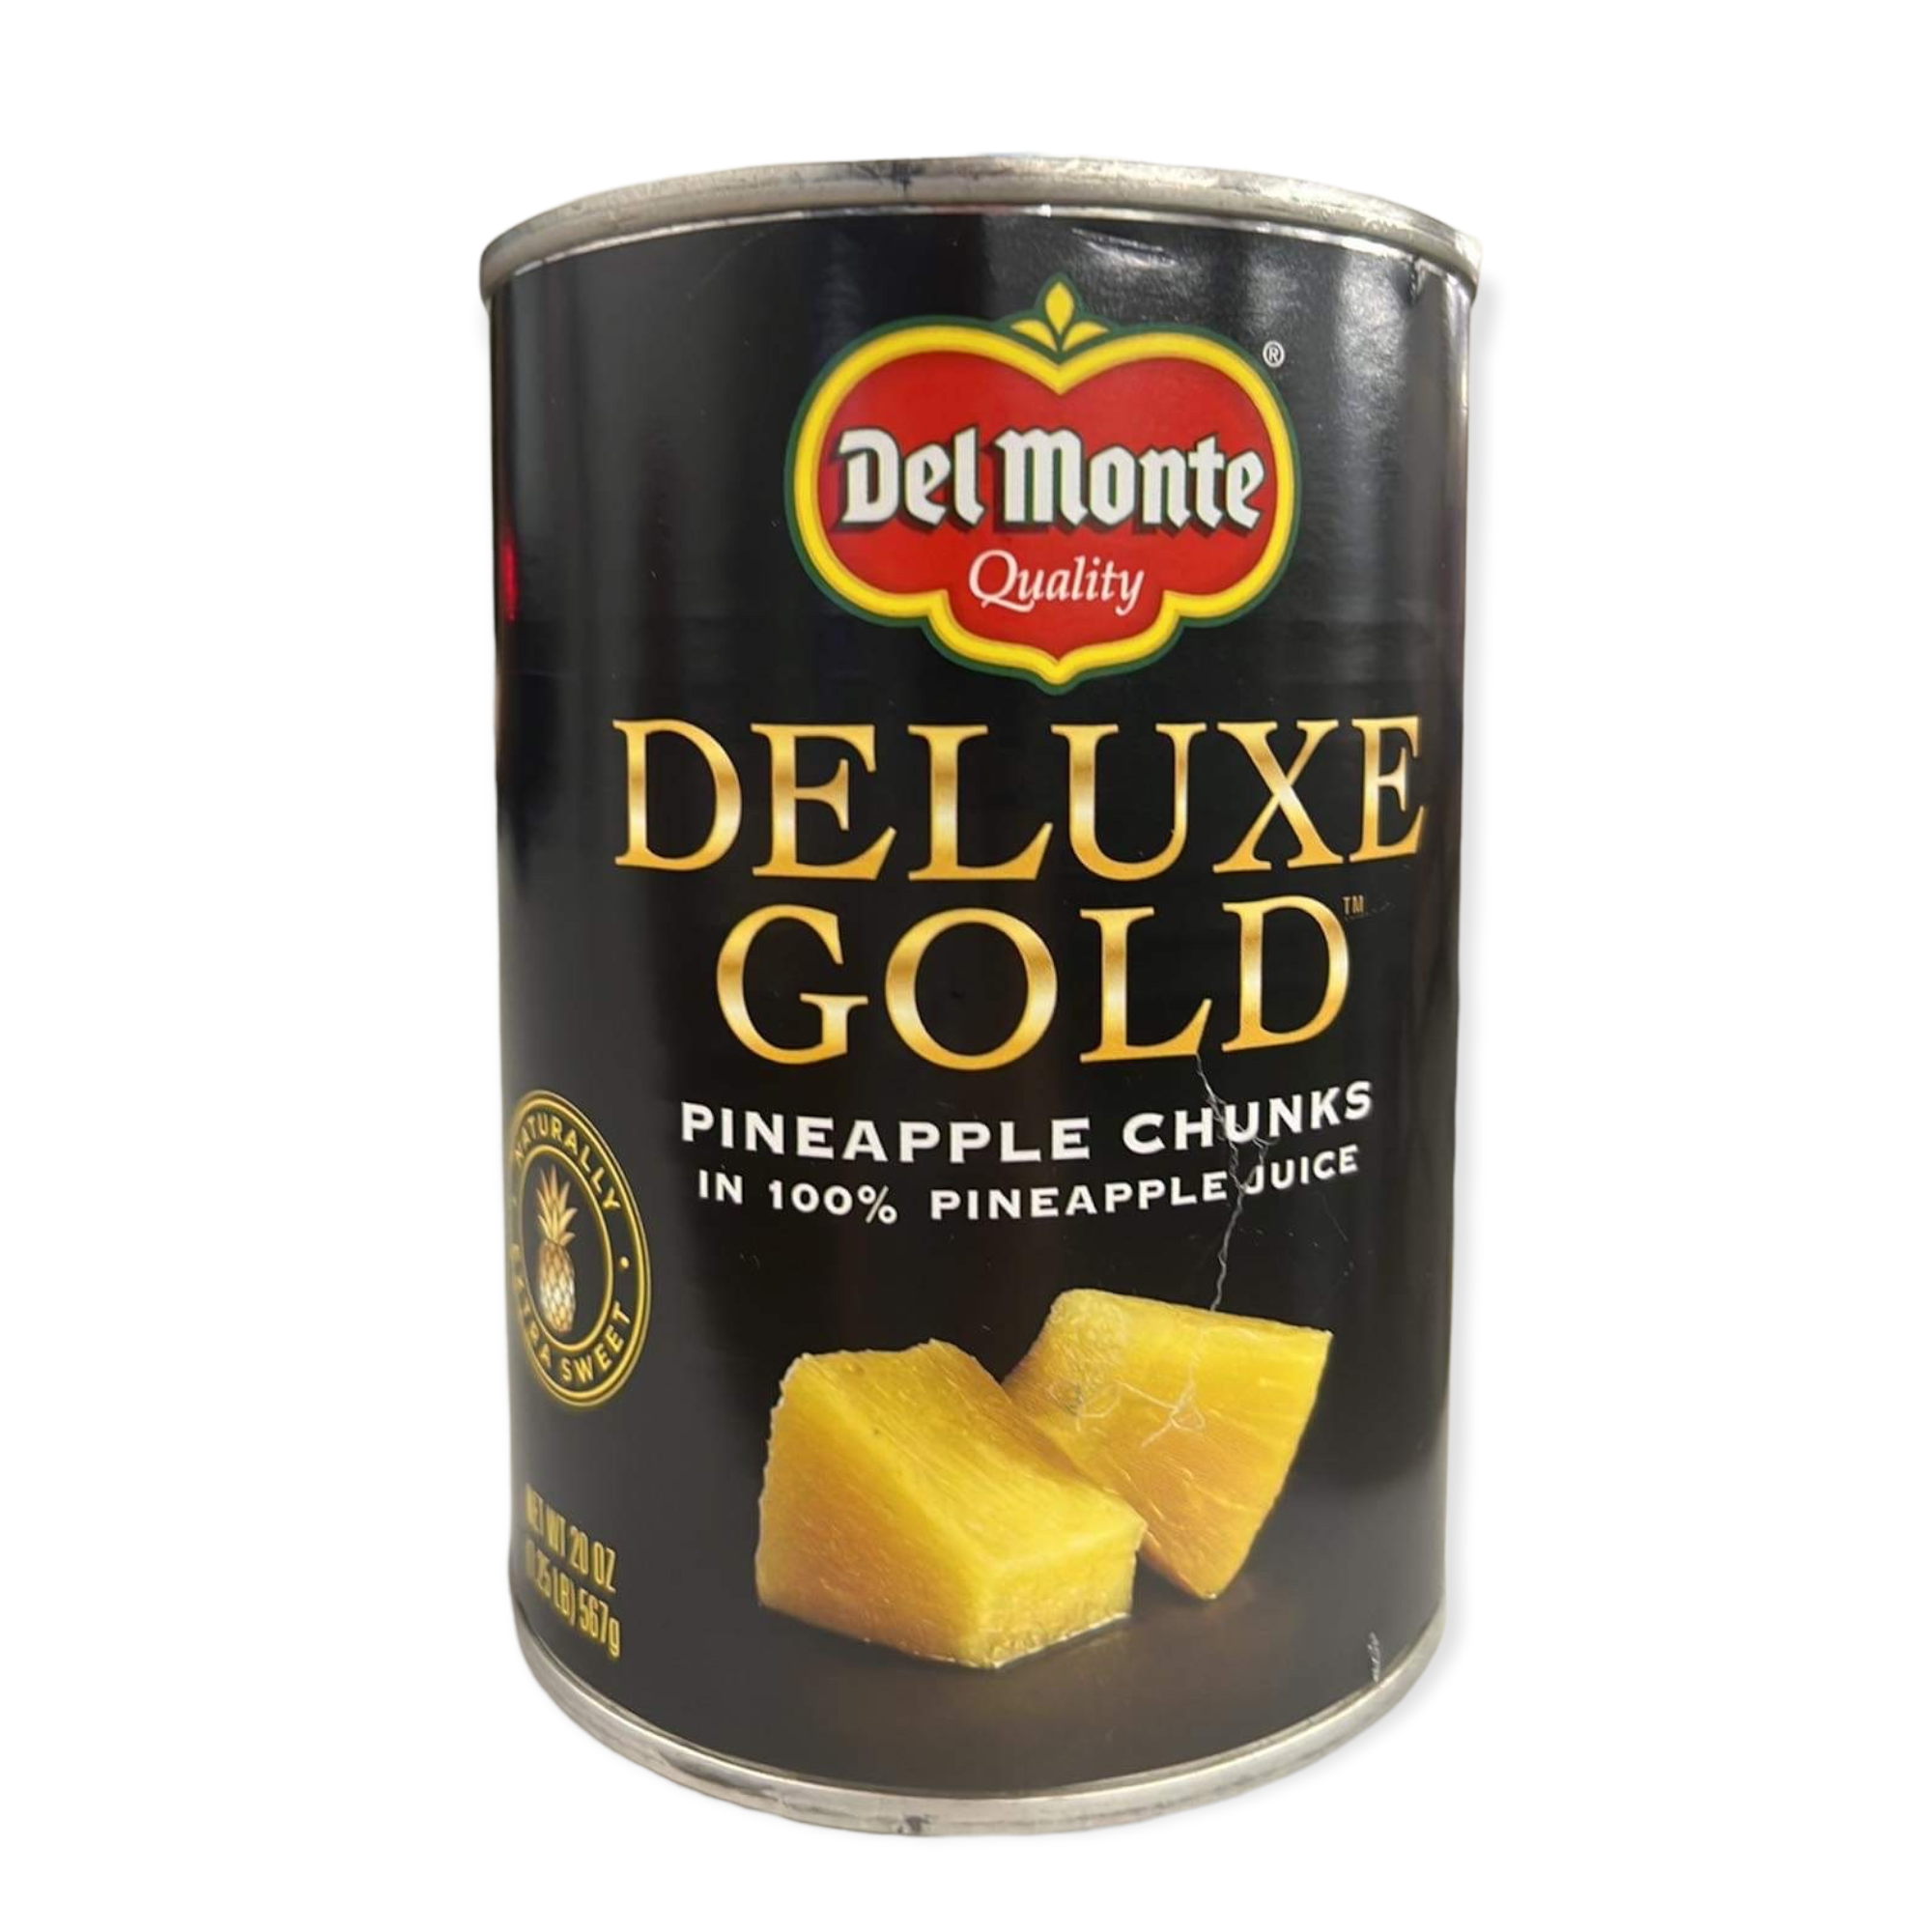 Del Monte Quality - Deluxe Gold Pineapple Chunks in 100% Pineapple Juice - 20 OZ